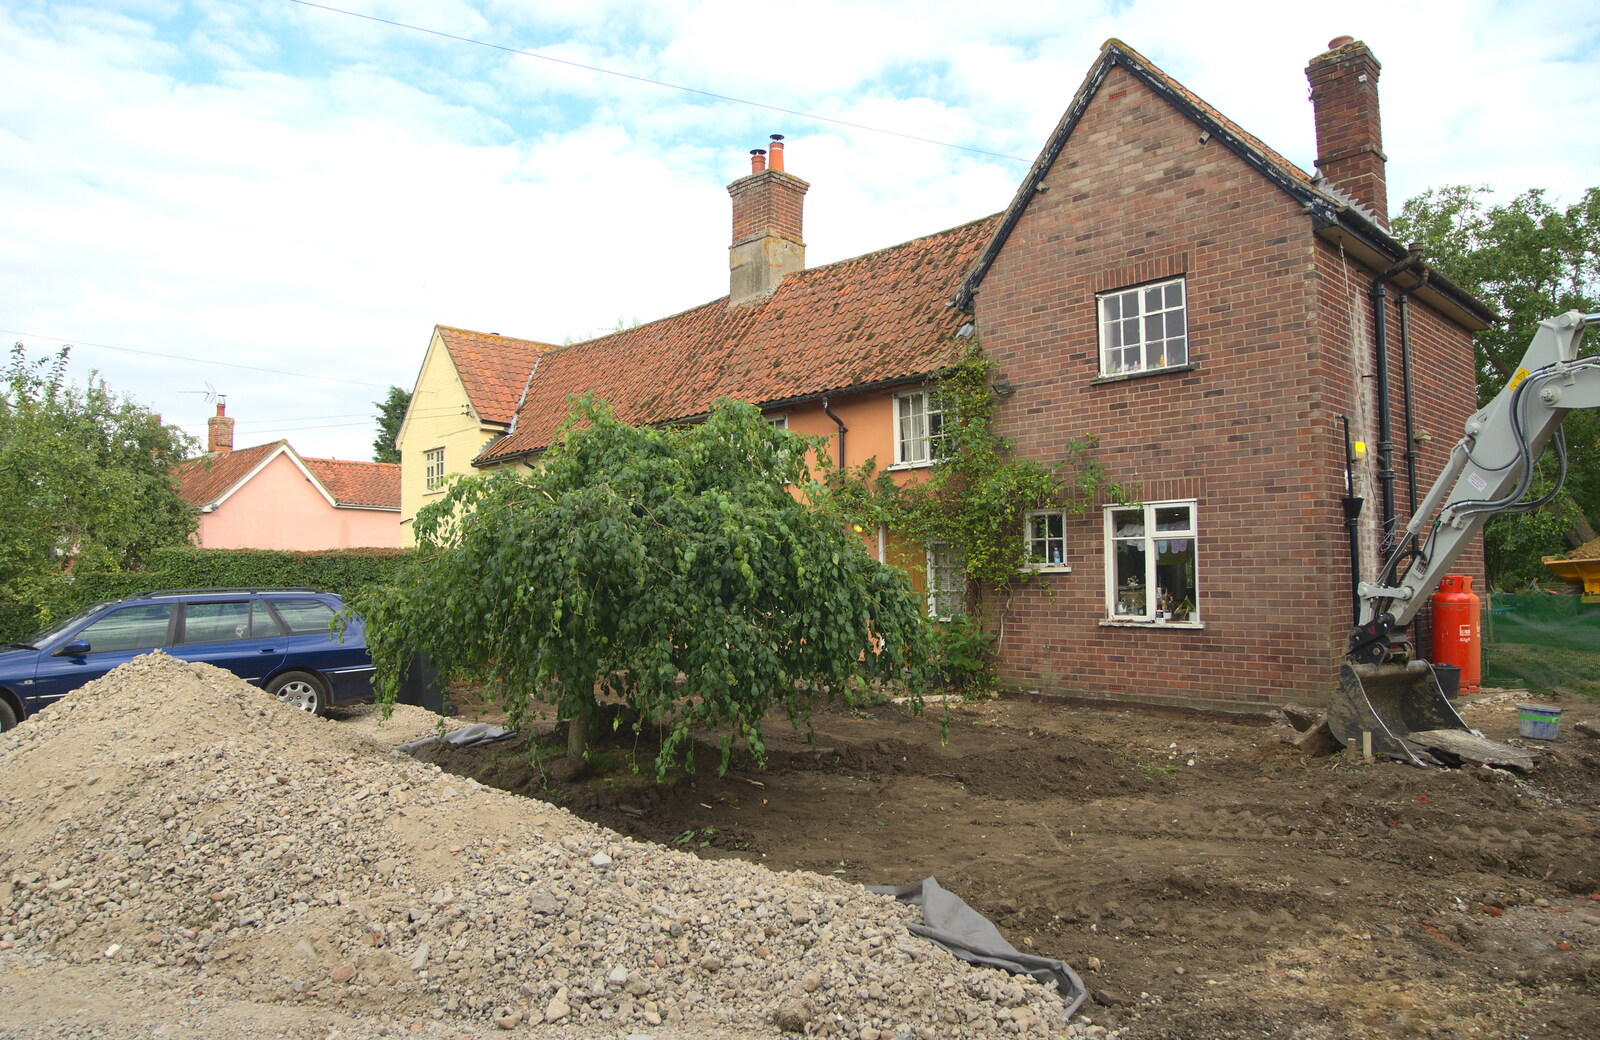 A pile of crushed conrete is ready from Grand Designs: Building Commences, Brome, Suffolk - 8th August 2013